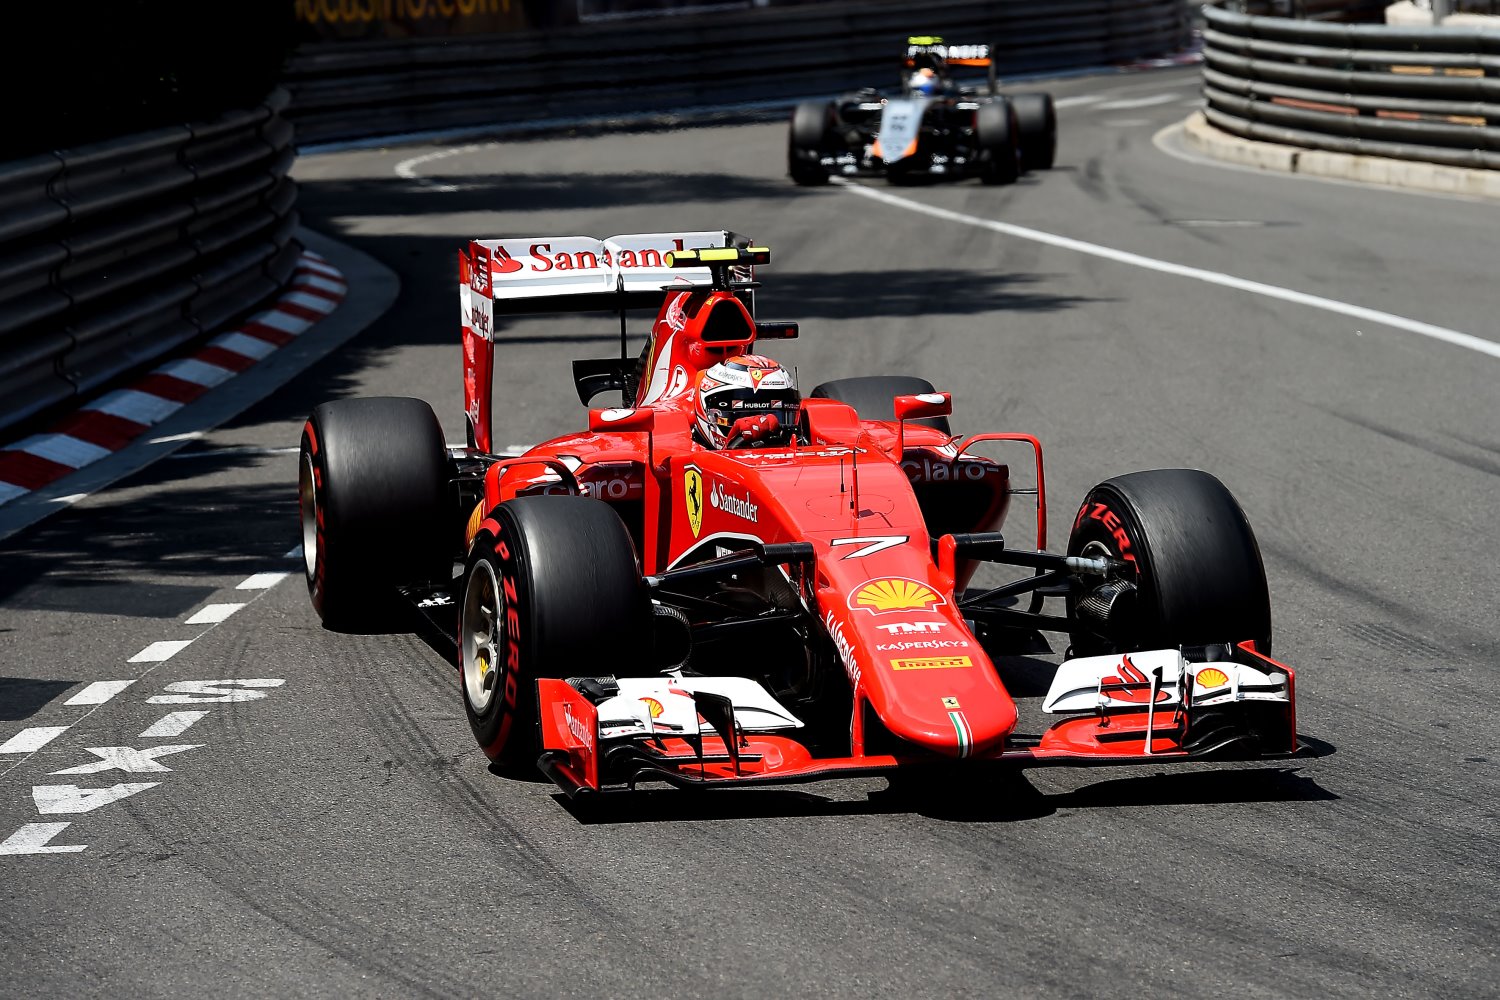 Ferrari has made gains on Mercedes, but it's not enough